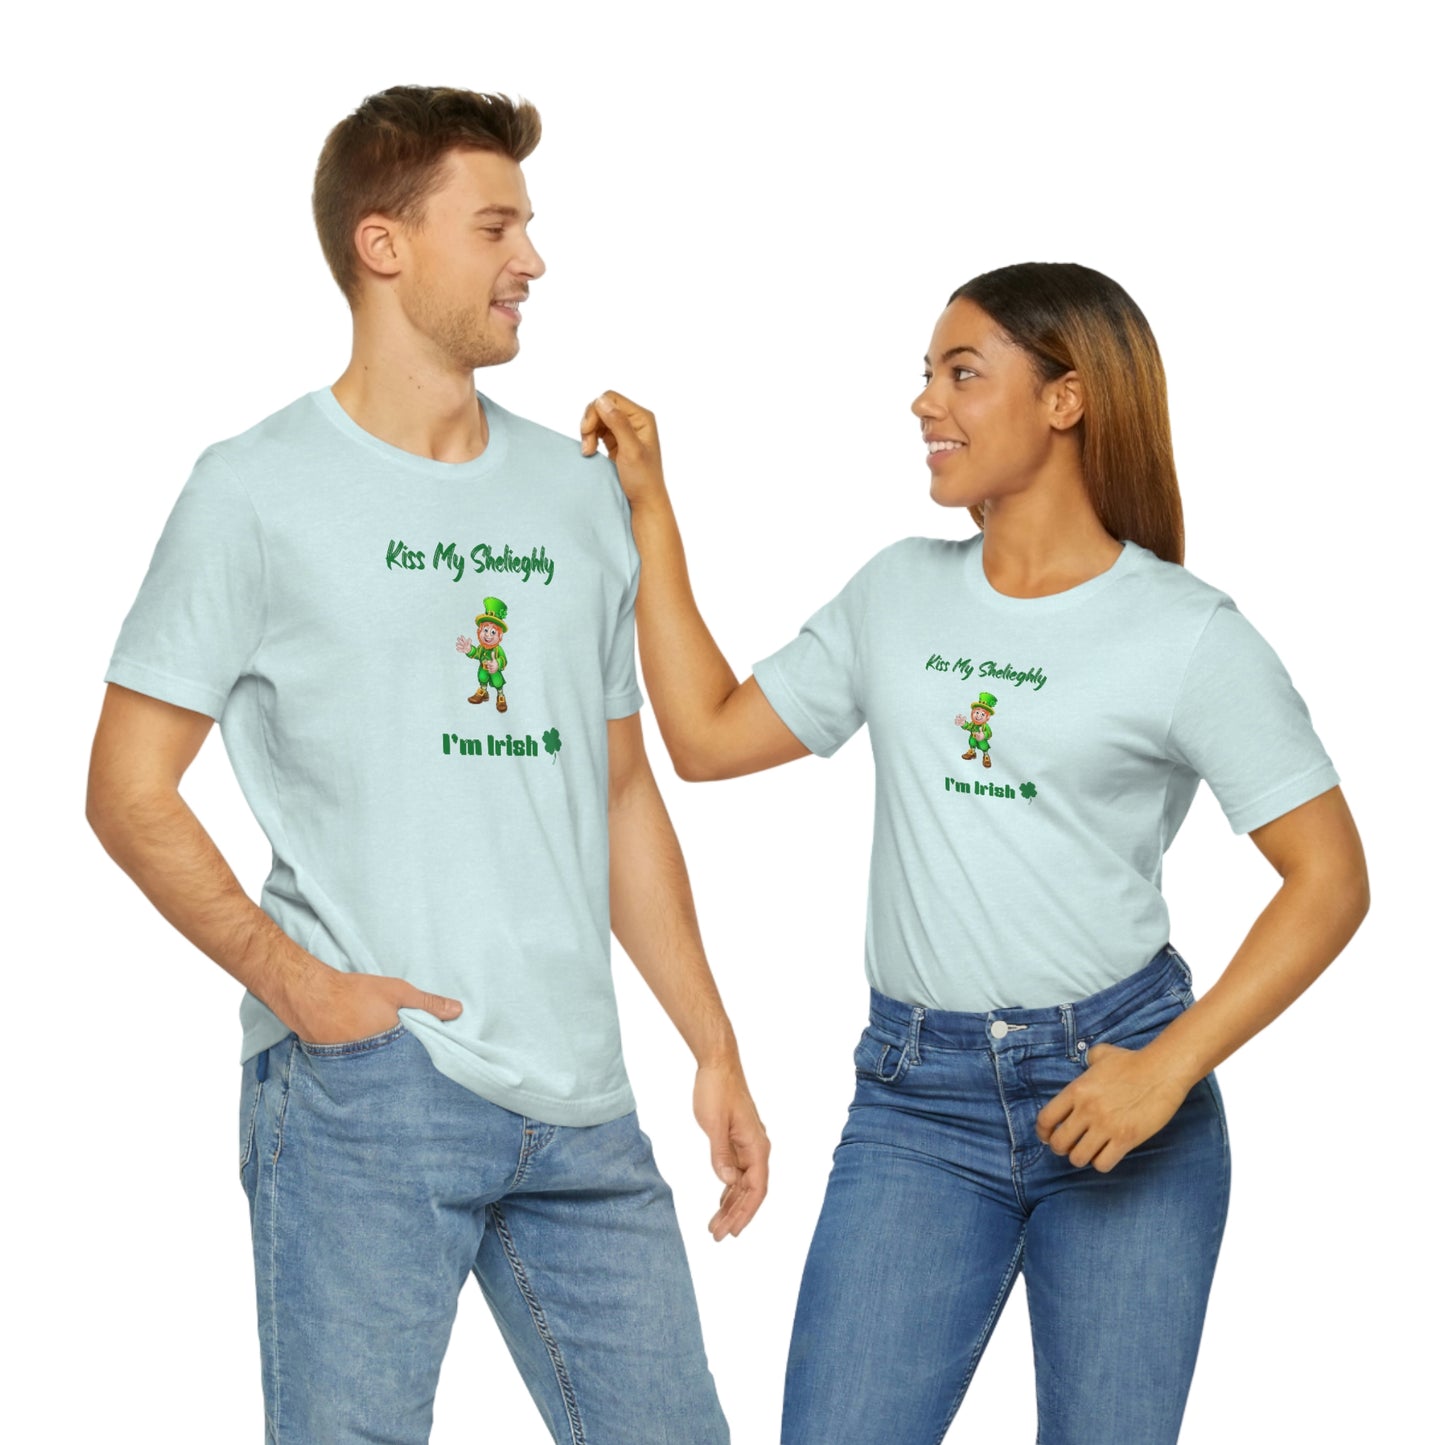 St. Patrick's Day:  Men's Tee:  Kiss My Sheleighly